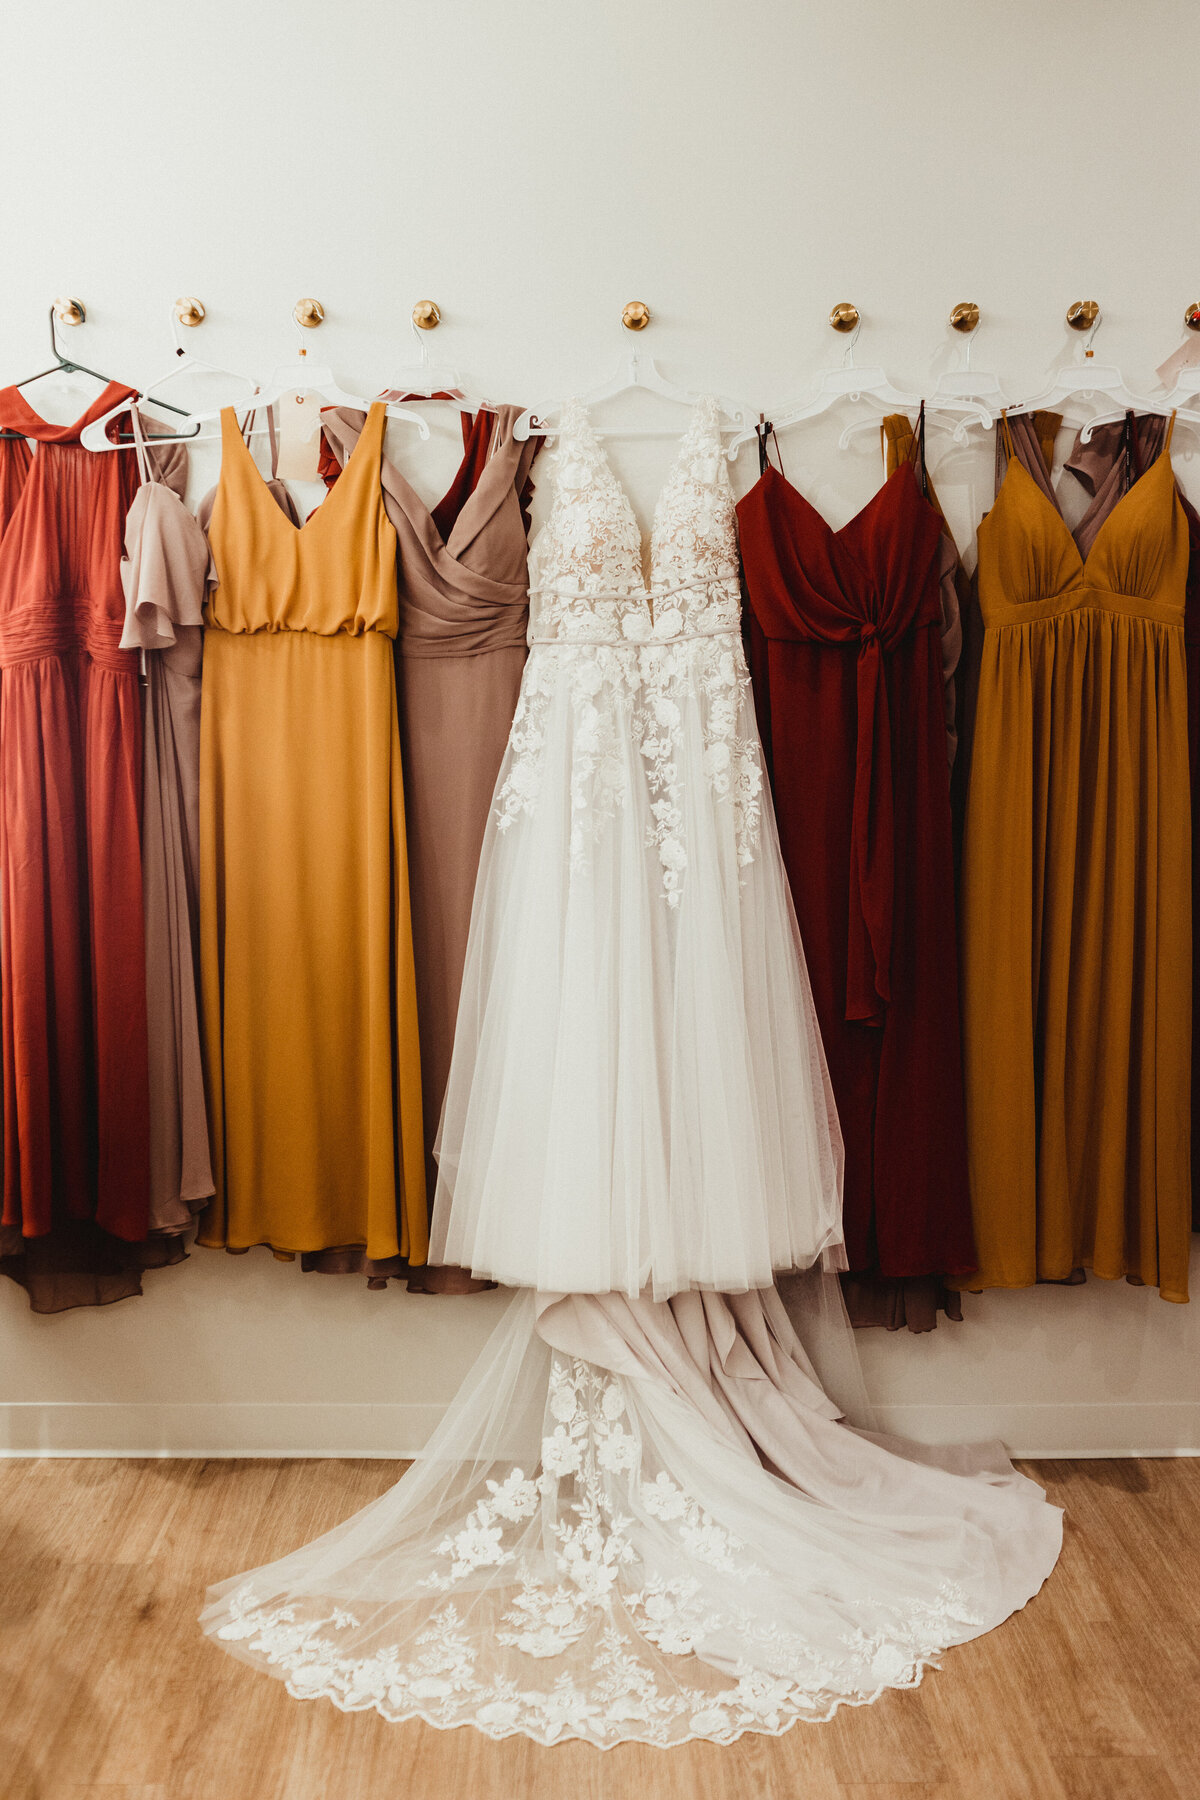 wedding gown and wedding party dresses hanging up